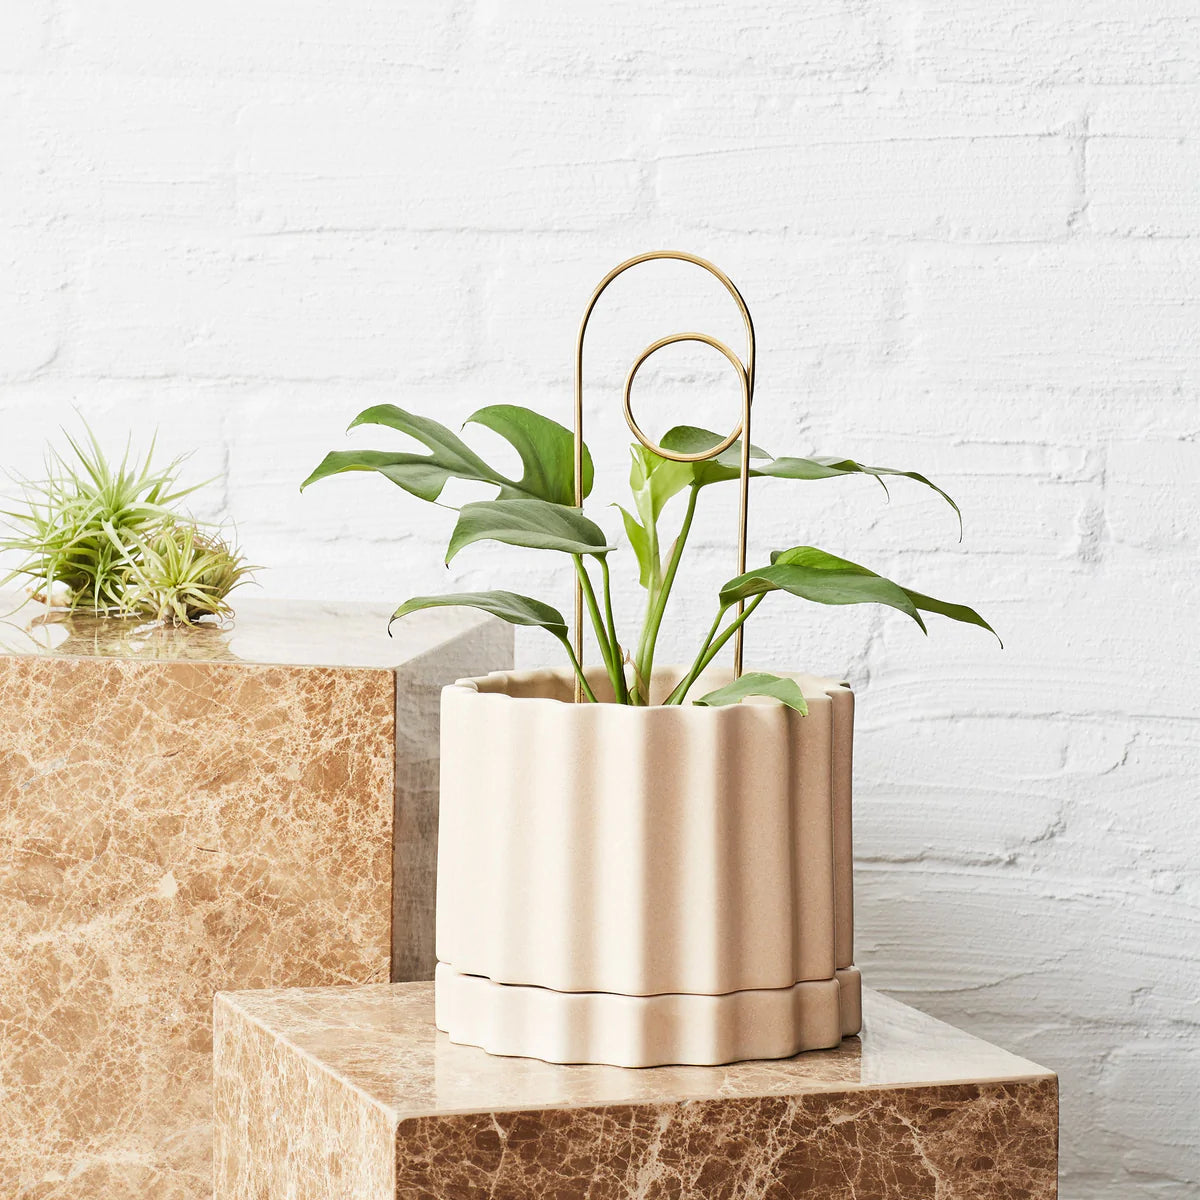 Ivy Muse Loop Brass Plant Stake in Pot